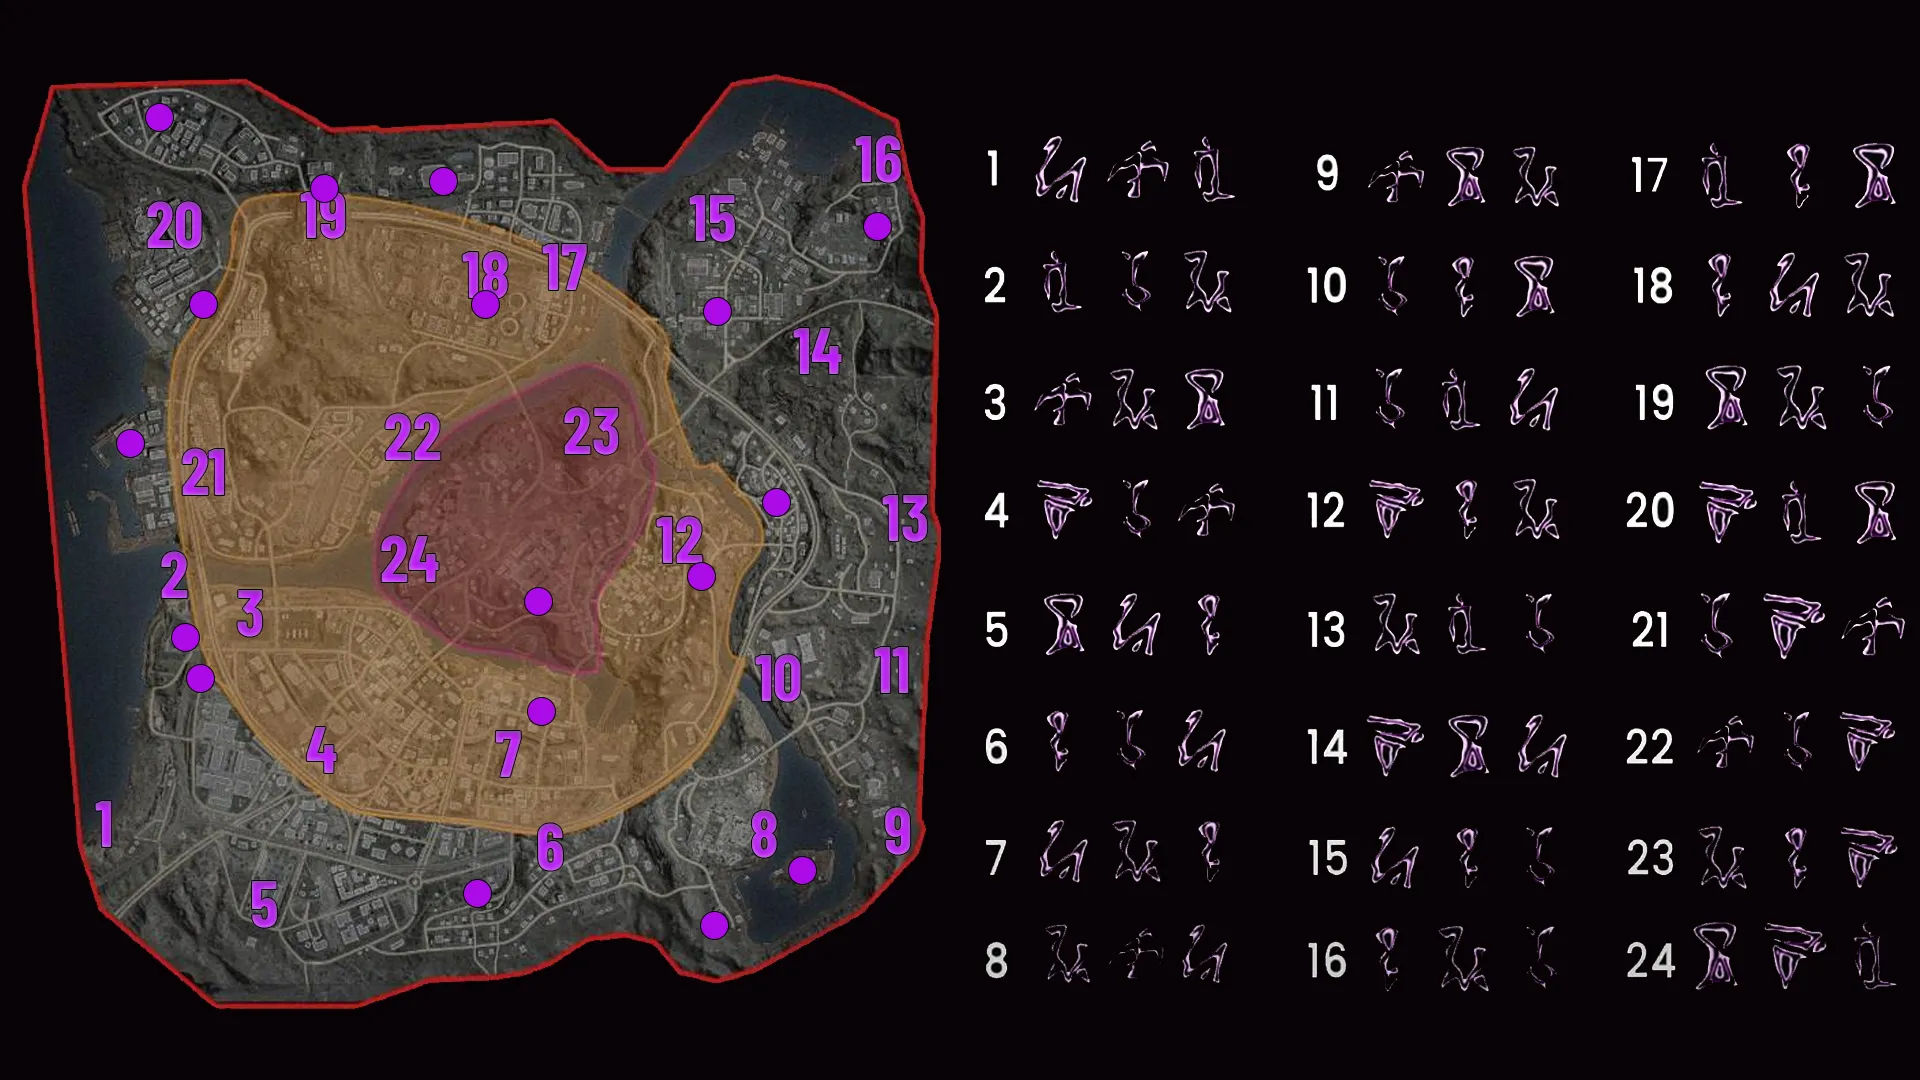 Portal locations and rune combinations mwz